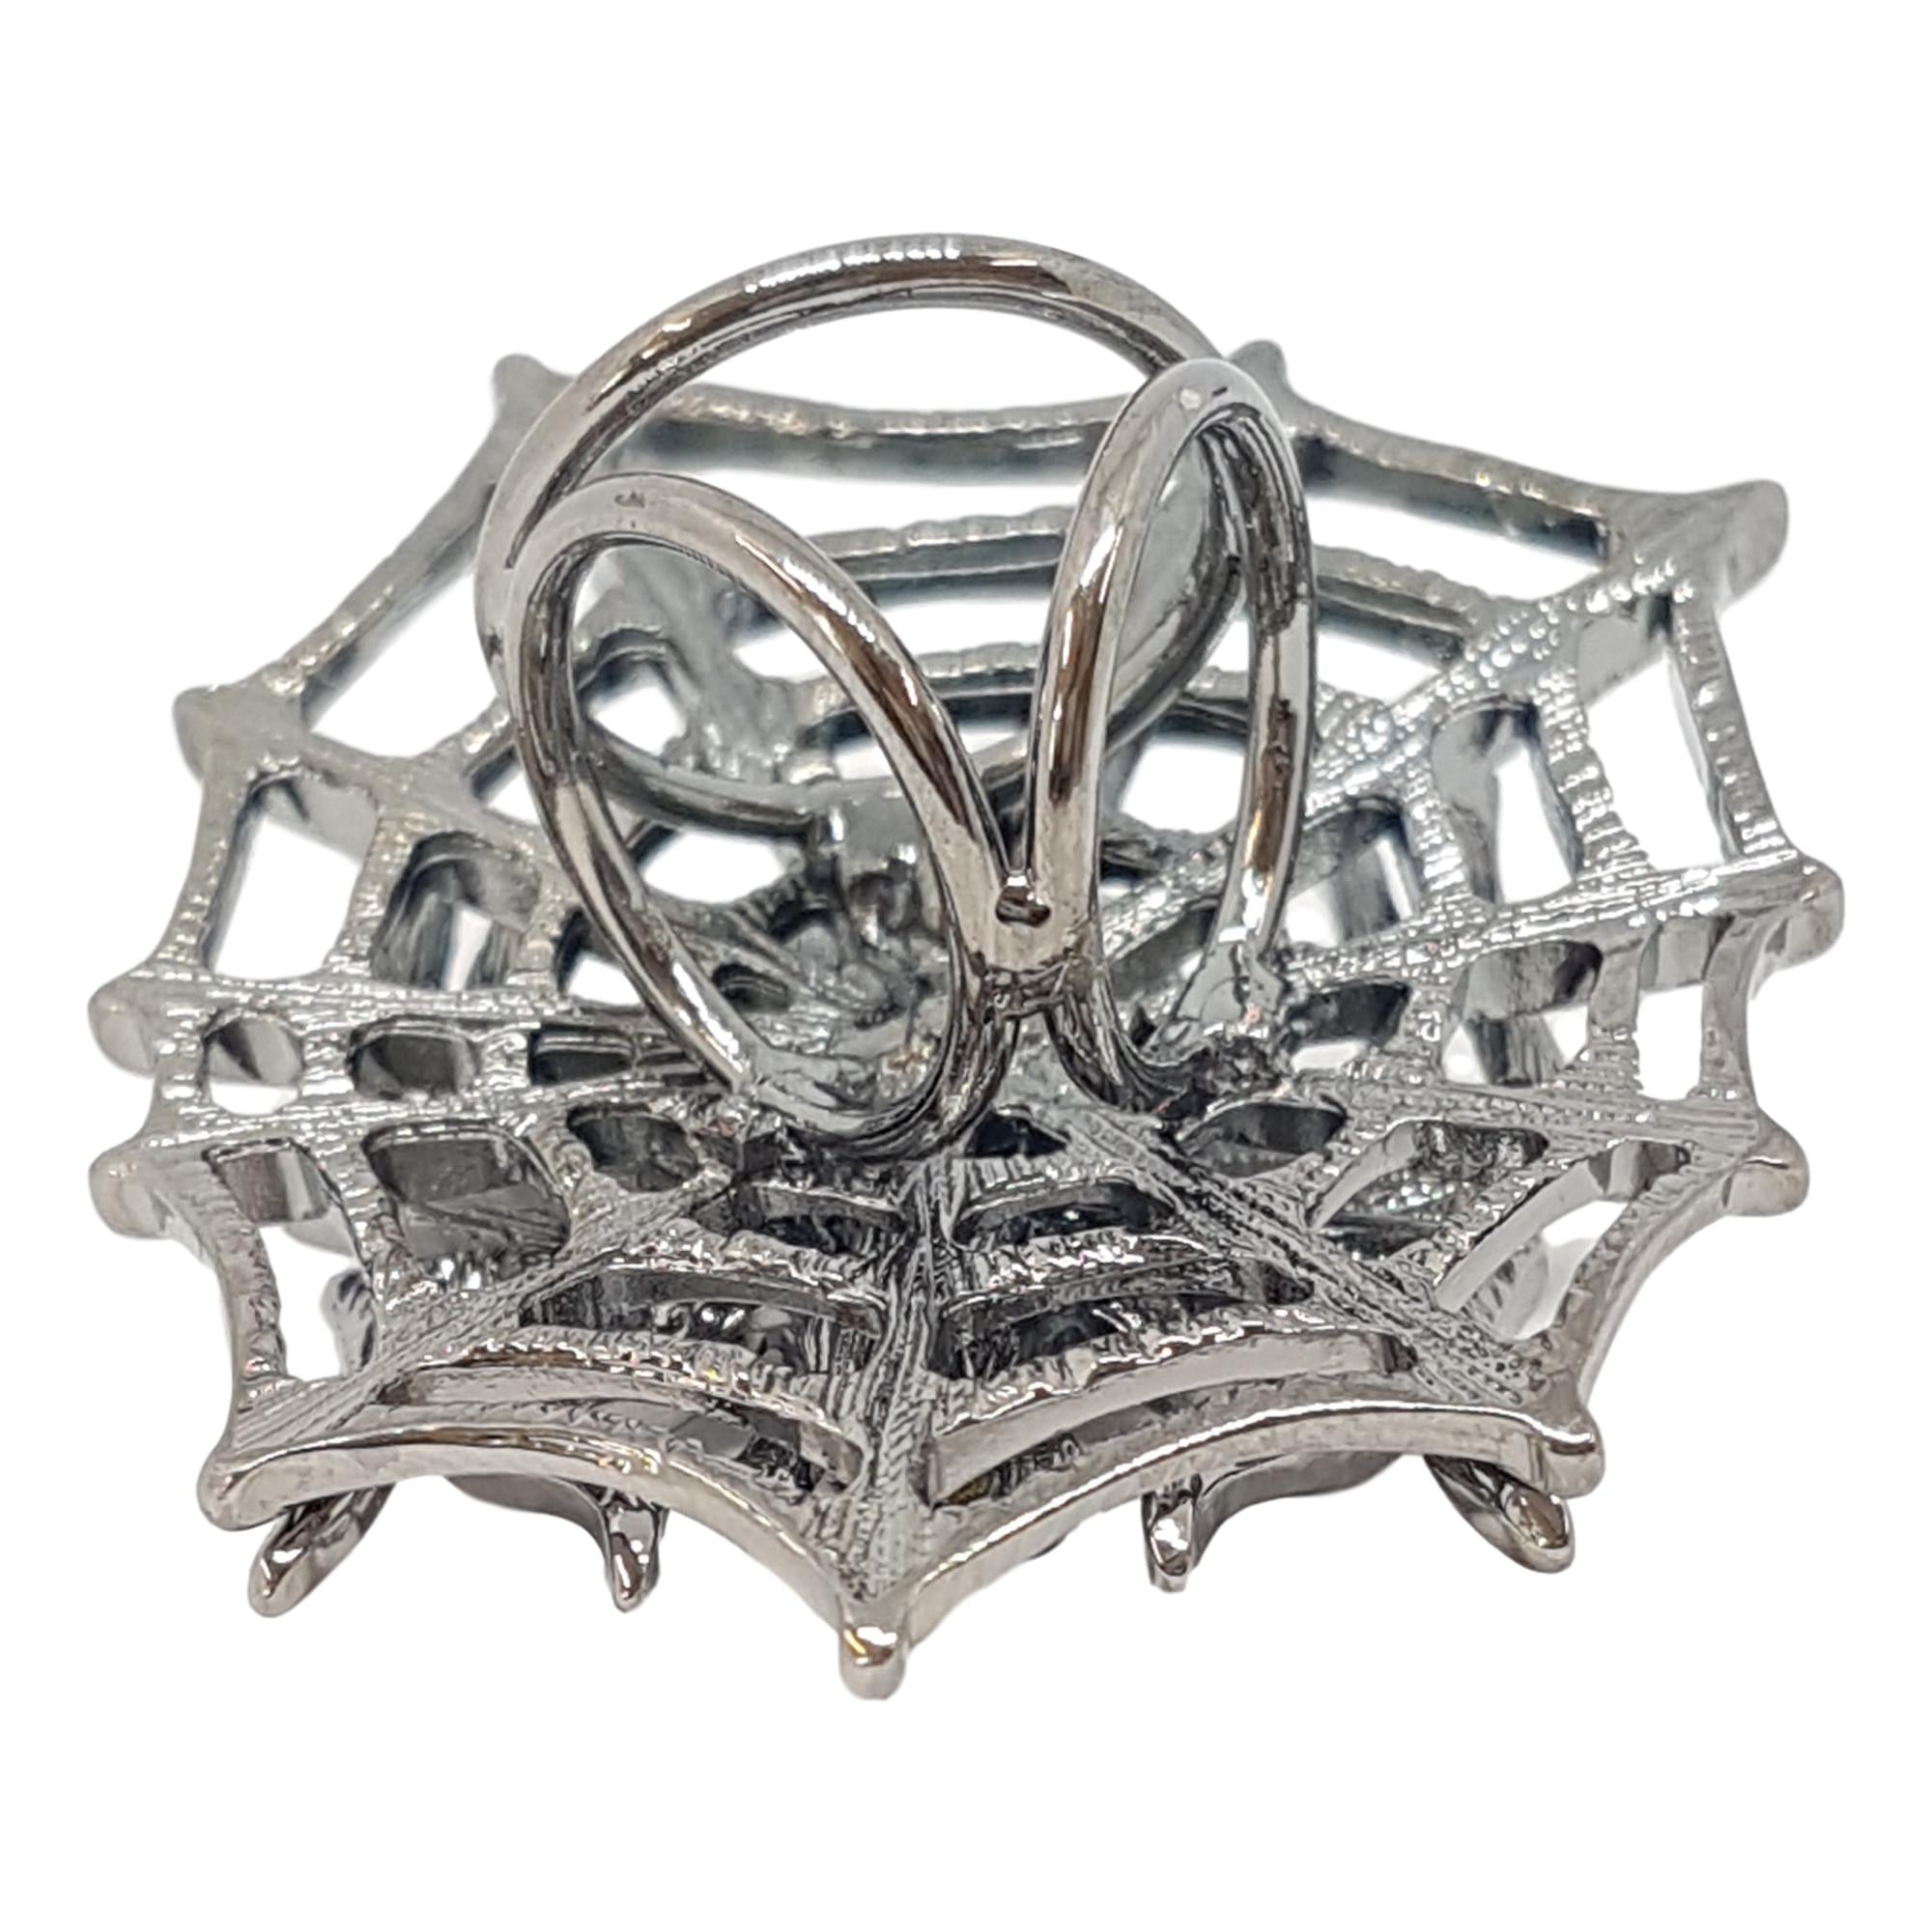 Silver Flower Triple Scarf Ring - (Small Rings) in Gift Box